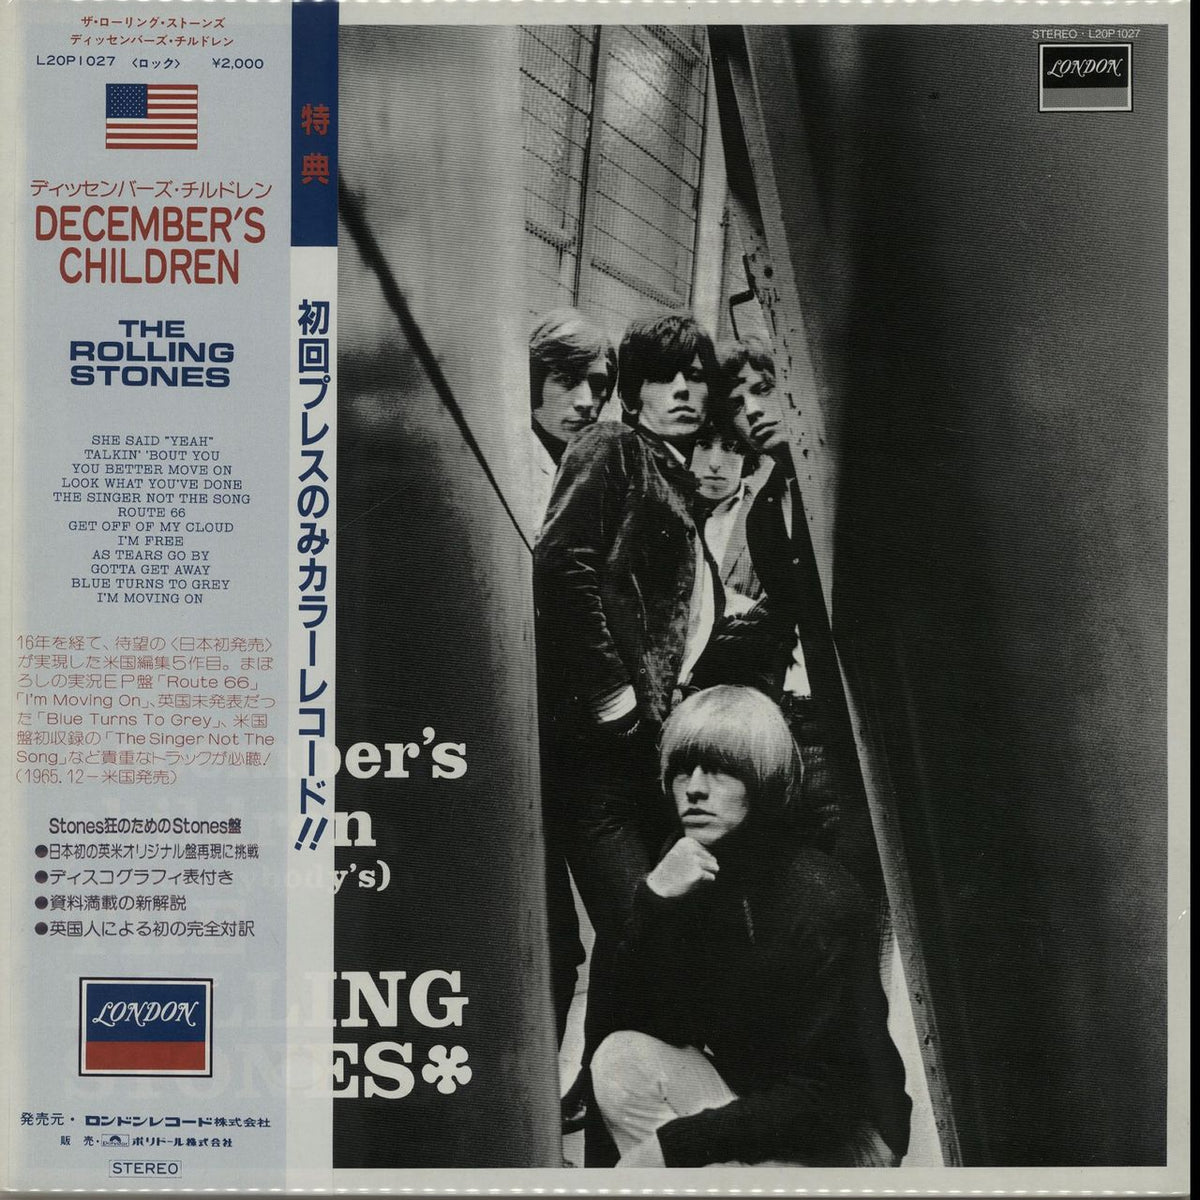 The Rolling Stones December's Children (And Everybody's) - Orange 